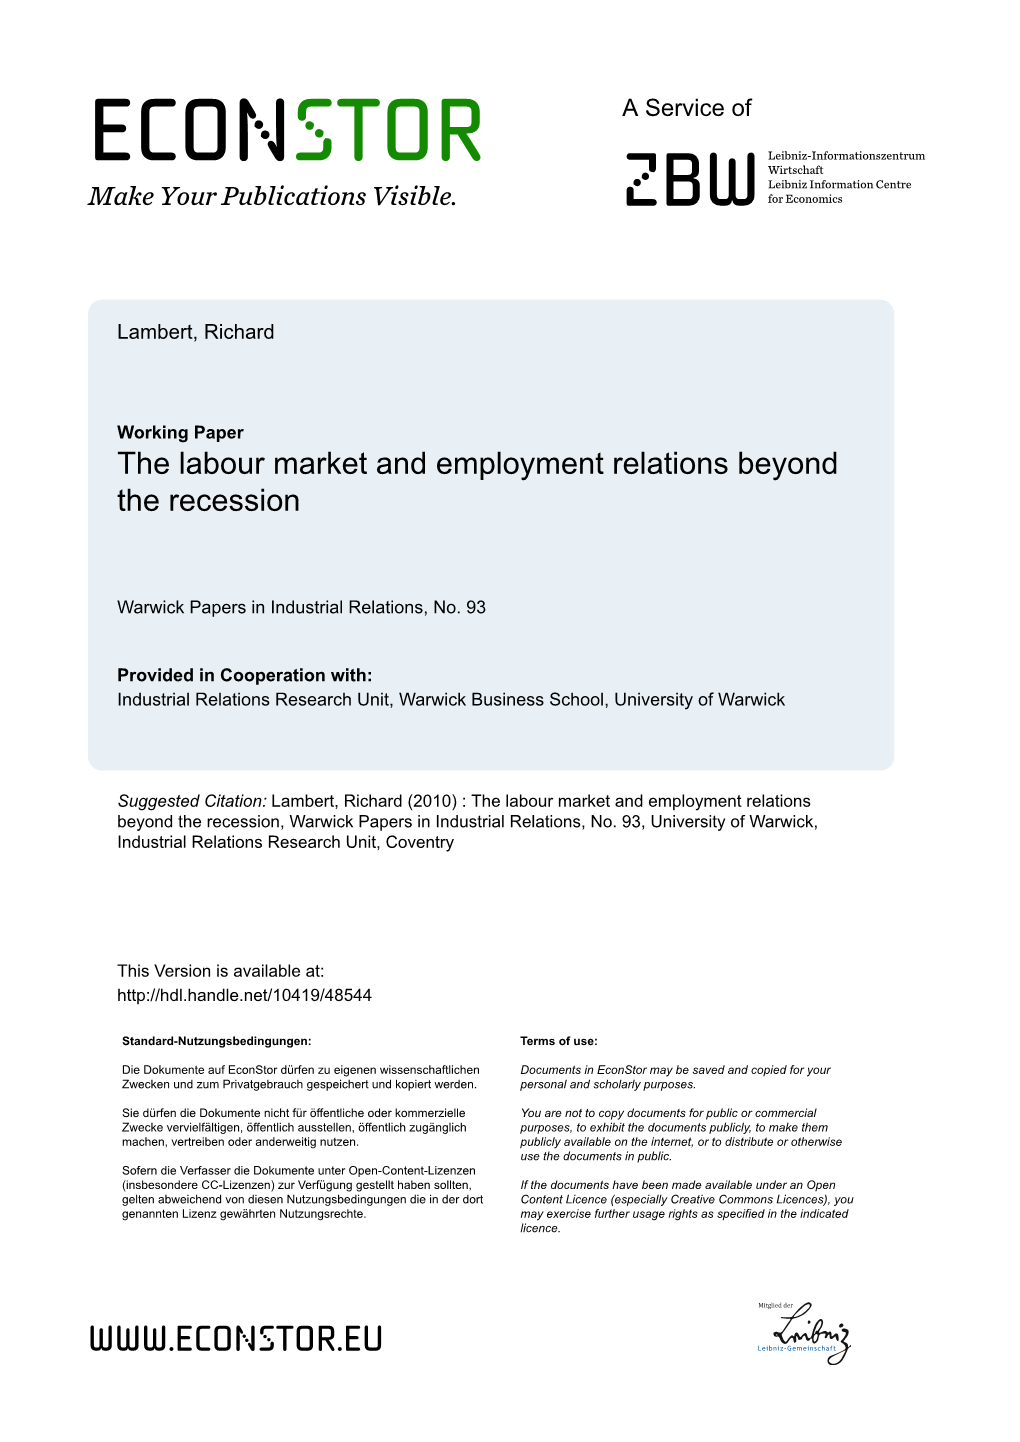 The Labour Market and Employment Relations Beyond the Recession